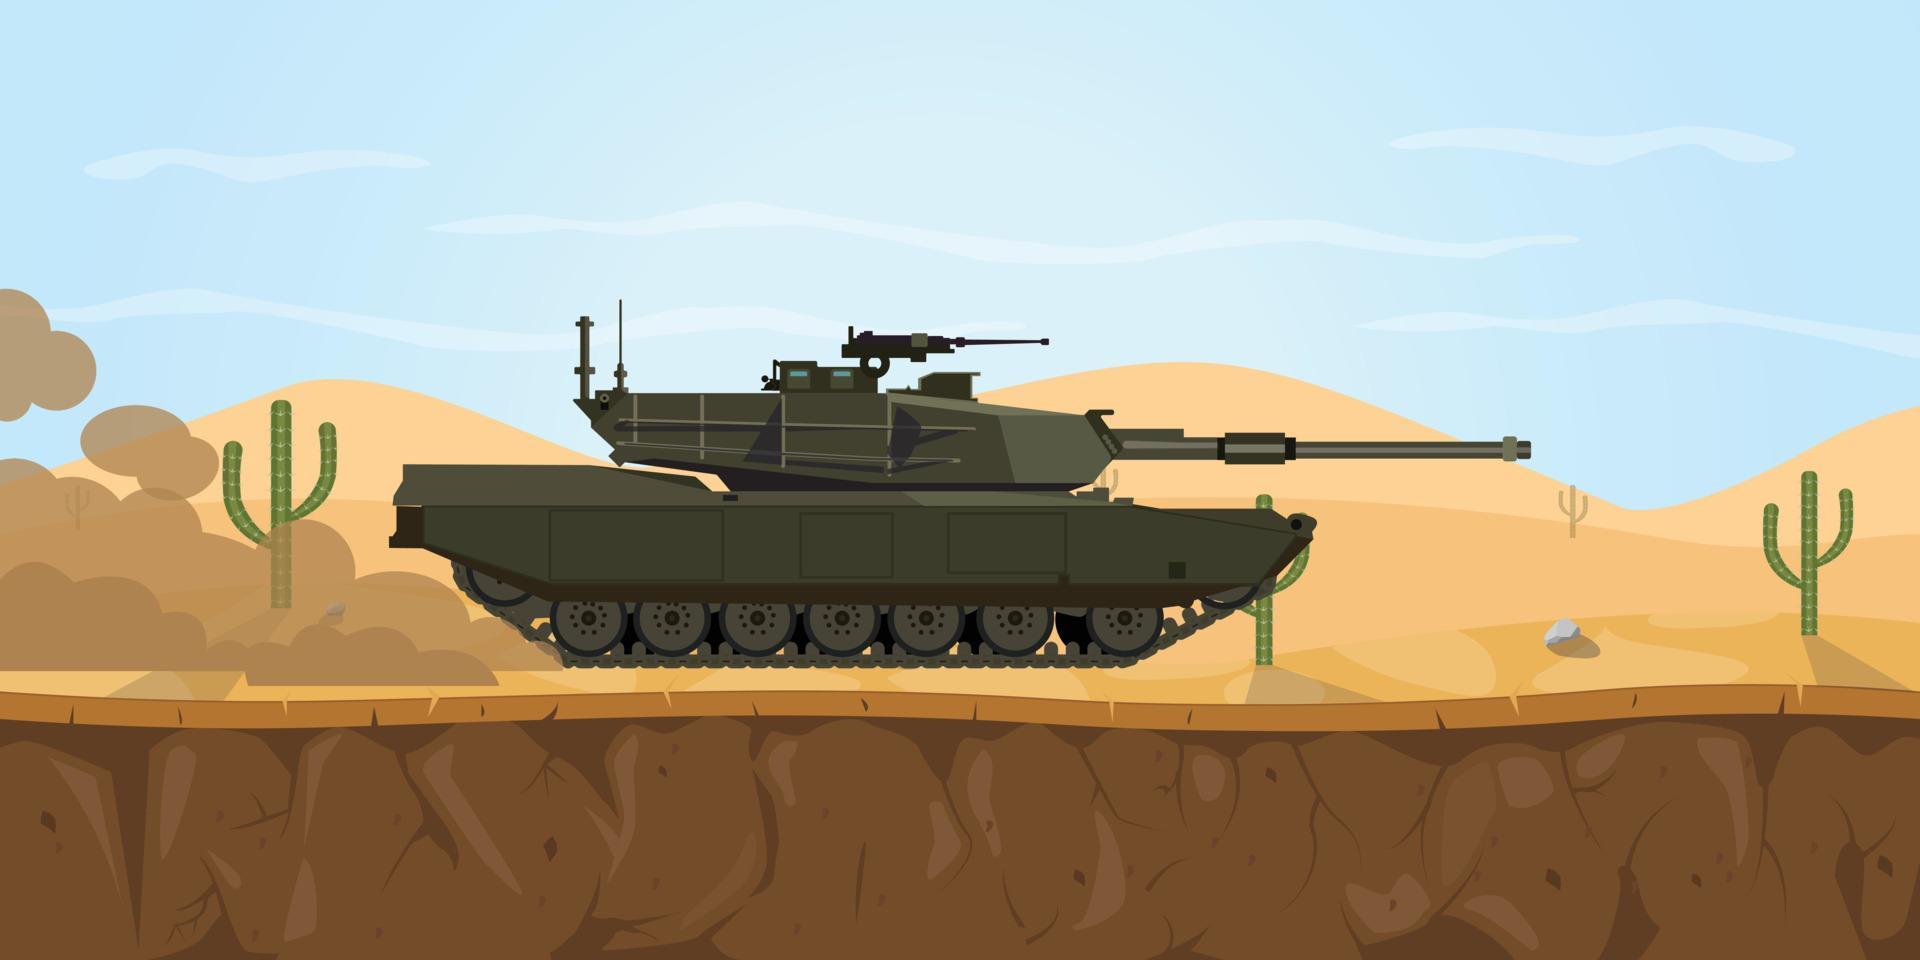 m1 abrams tank usa main battle tank on the desert with haze smoke on the road vector graphic illustration